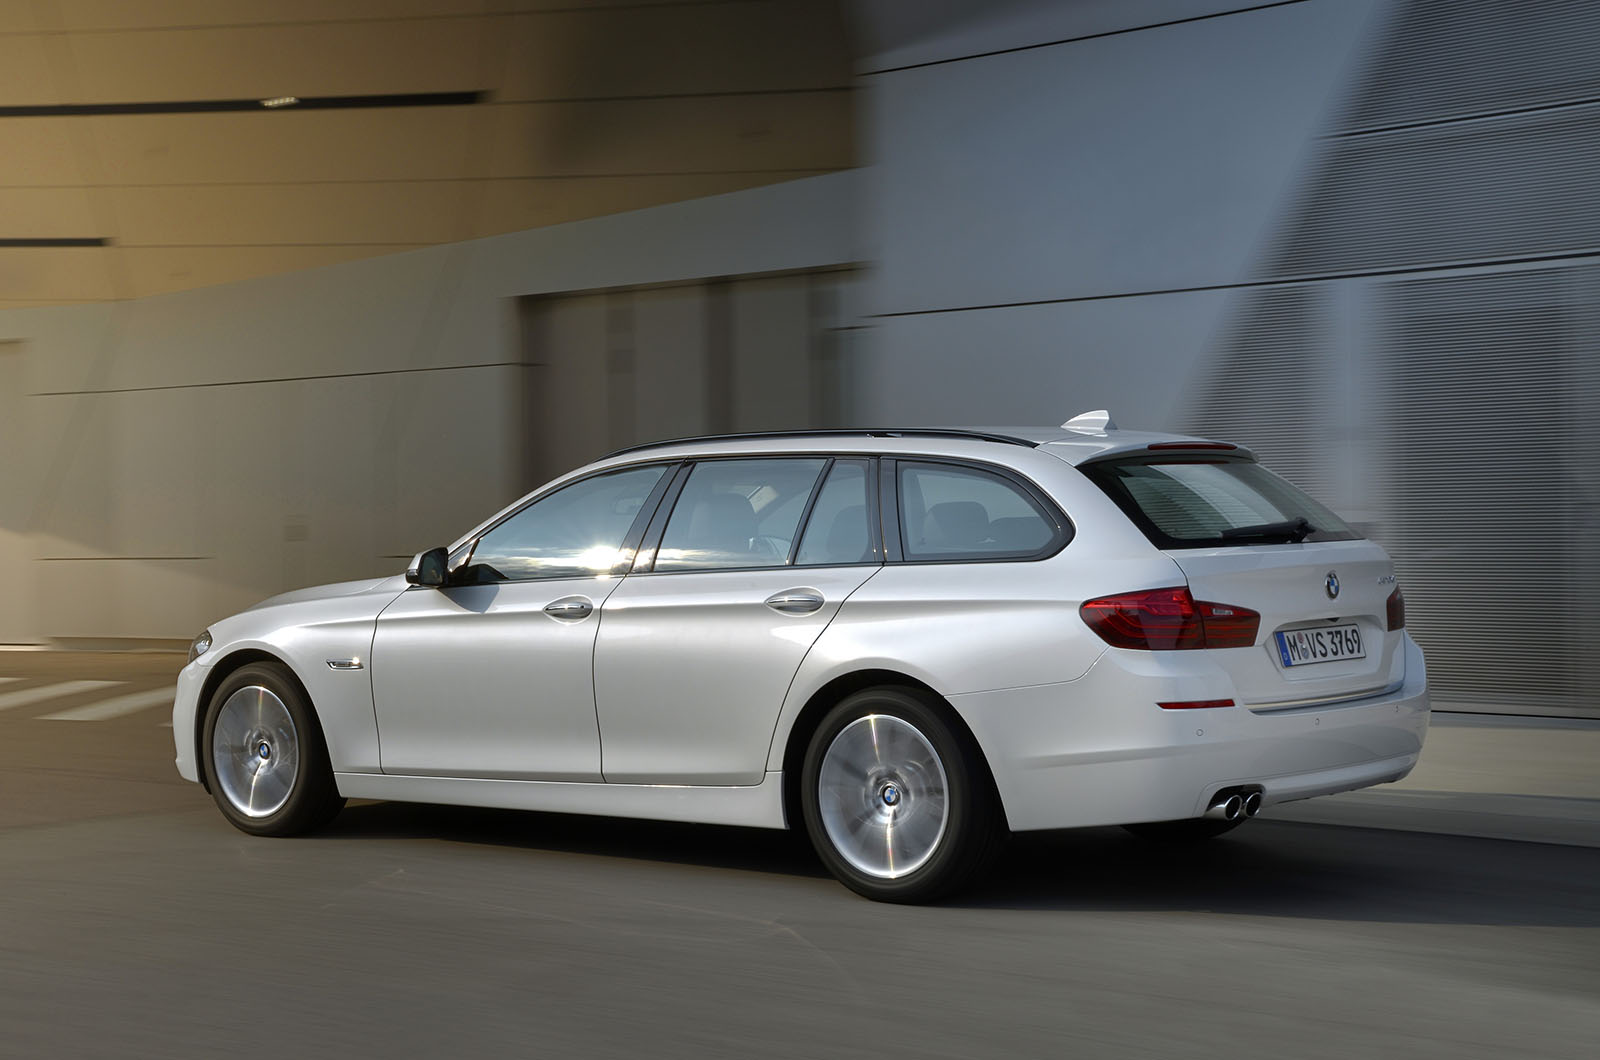 Used bmw 520d touring review #2